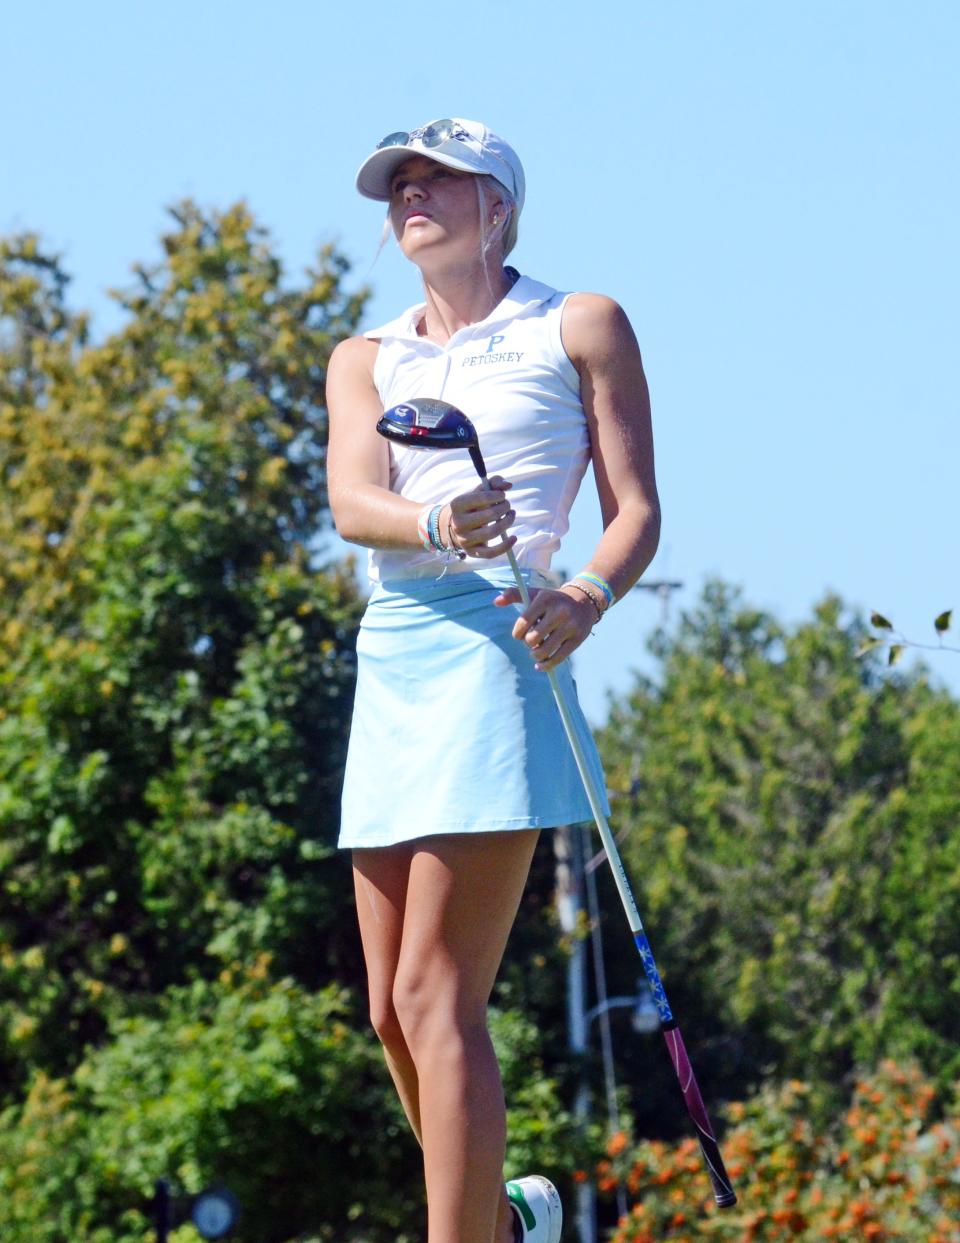 Marley Spence and the Petoskey girls' golf team got things started with the annual Lober Classic in Traverse City this Monday and Tuesday.